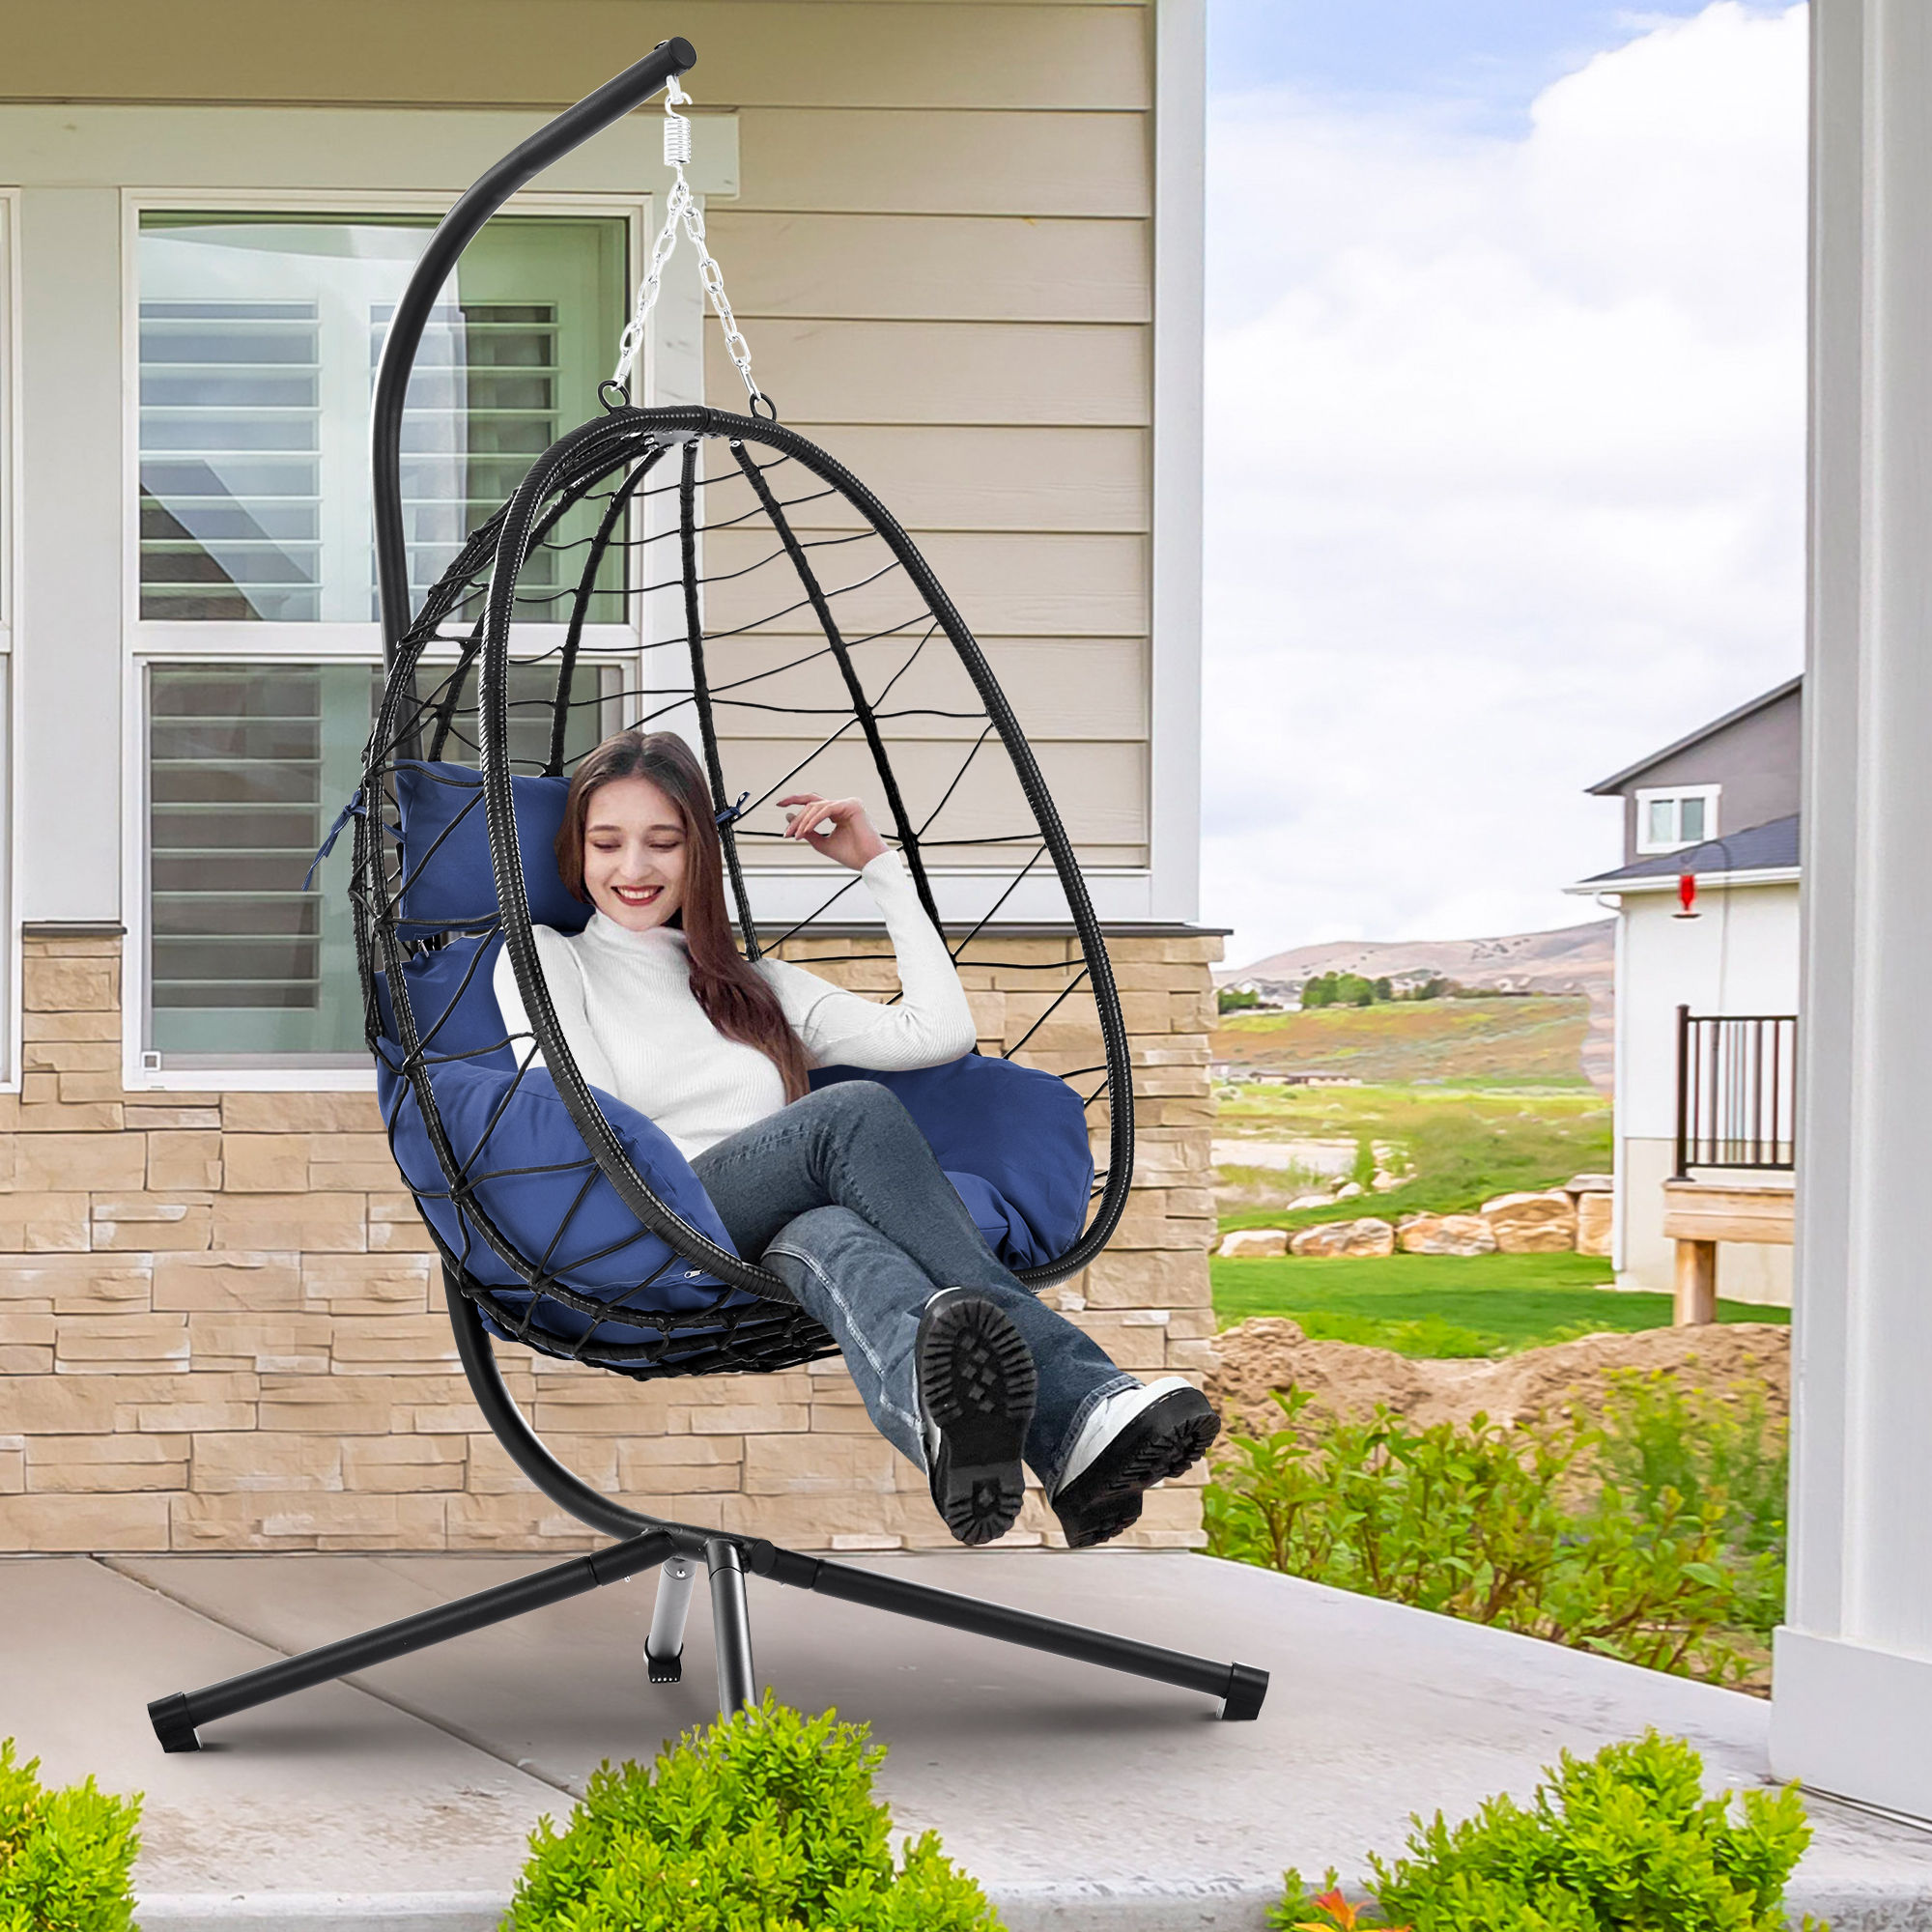 Patio Lounger Egg Chair, Outdoor Hanging Chaise Swing Egg-Shaped Chair w/Hanging Kits, Durable All-Weather UV Wicker Patio Rattan Lounge Chair for Bedroom, Patio, Deck, Yard, Garden, 350lbs, SS1993 - image 1 of 9